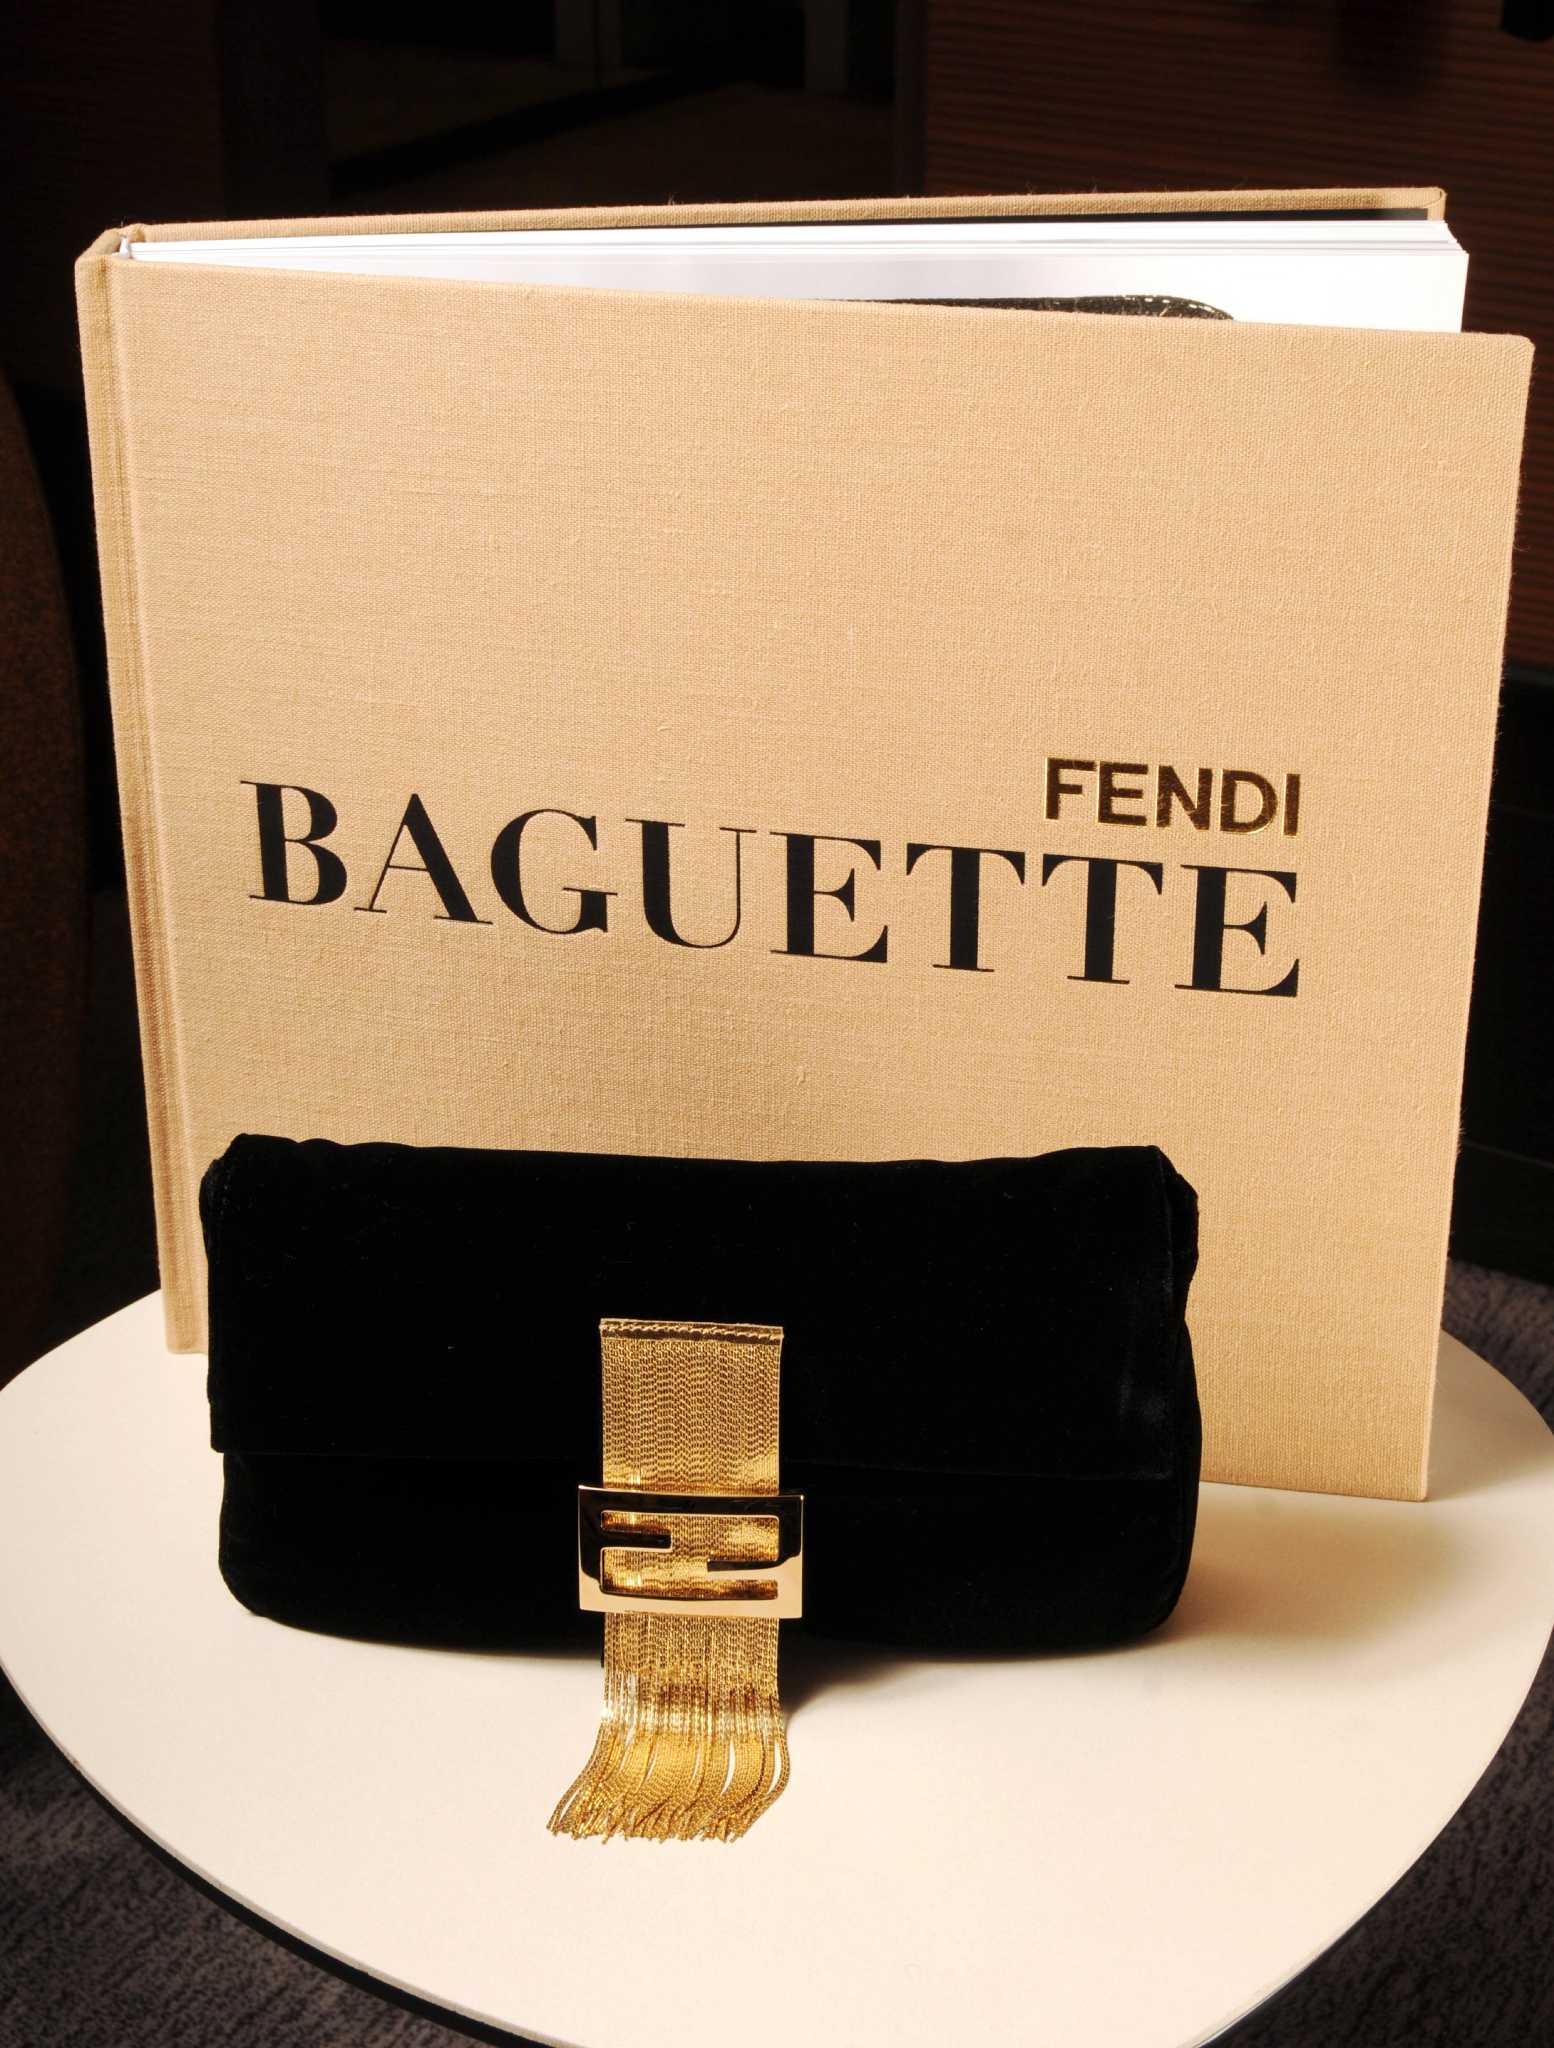 Fendi Has Relaunched Carrie Bradshaw's Iconic Baguette Bag - PAPER Magazine